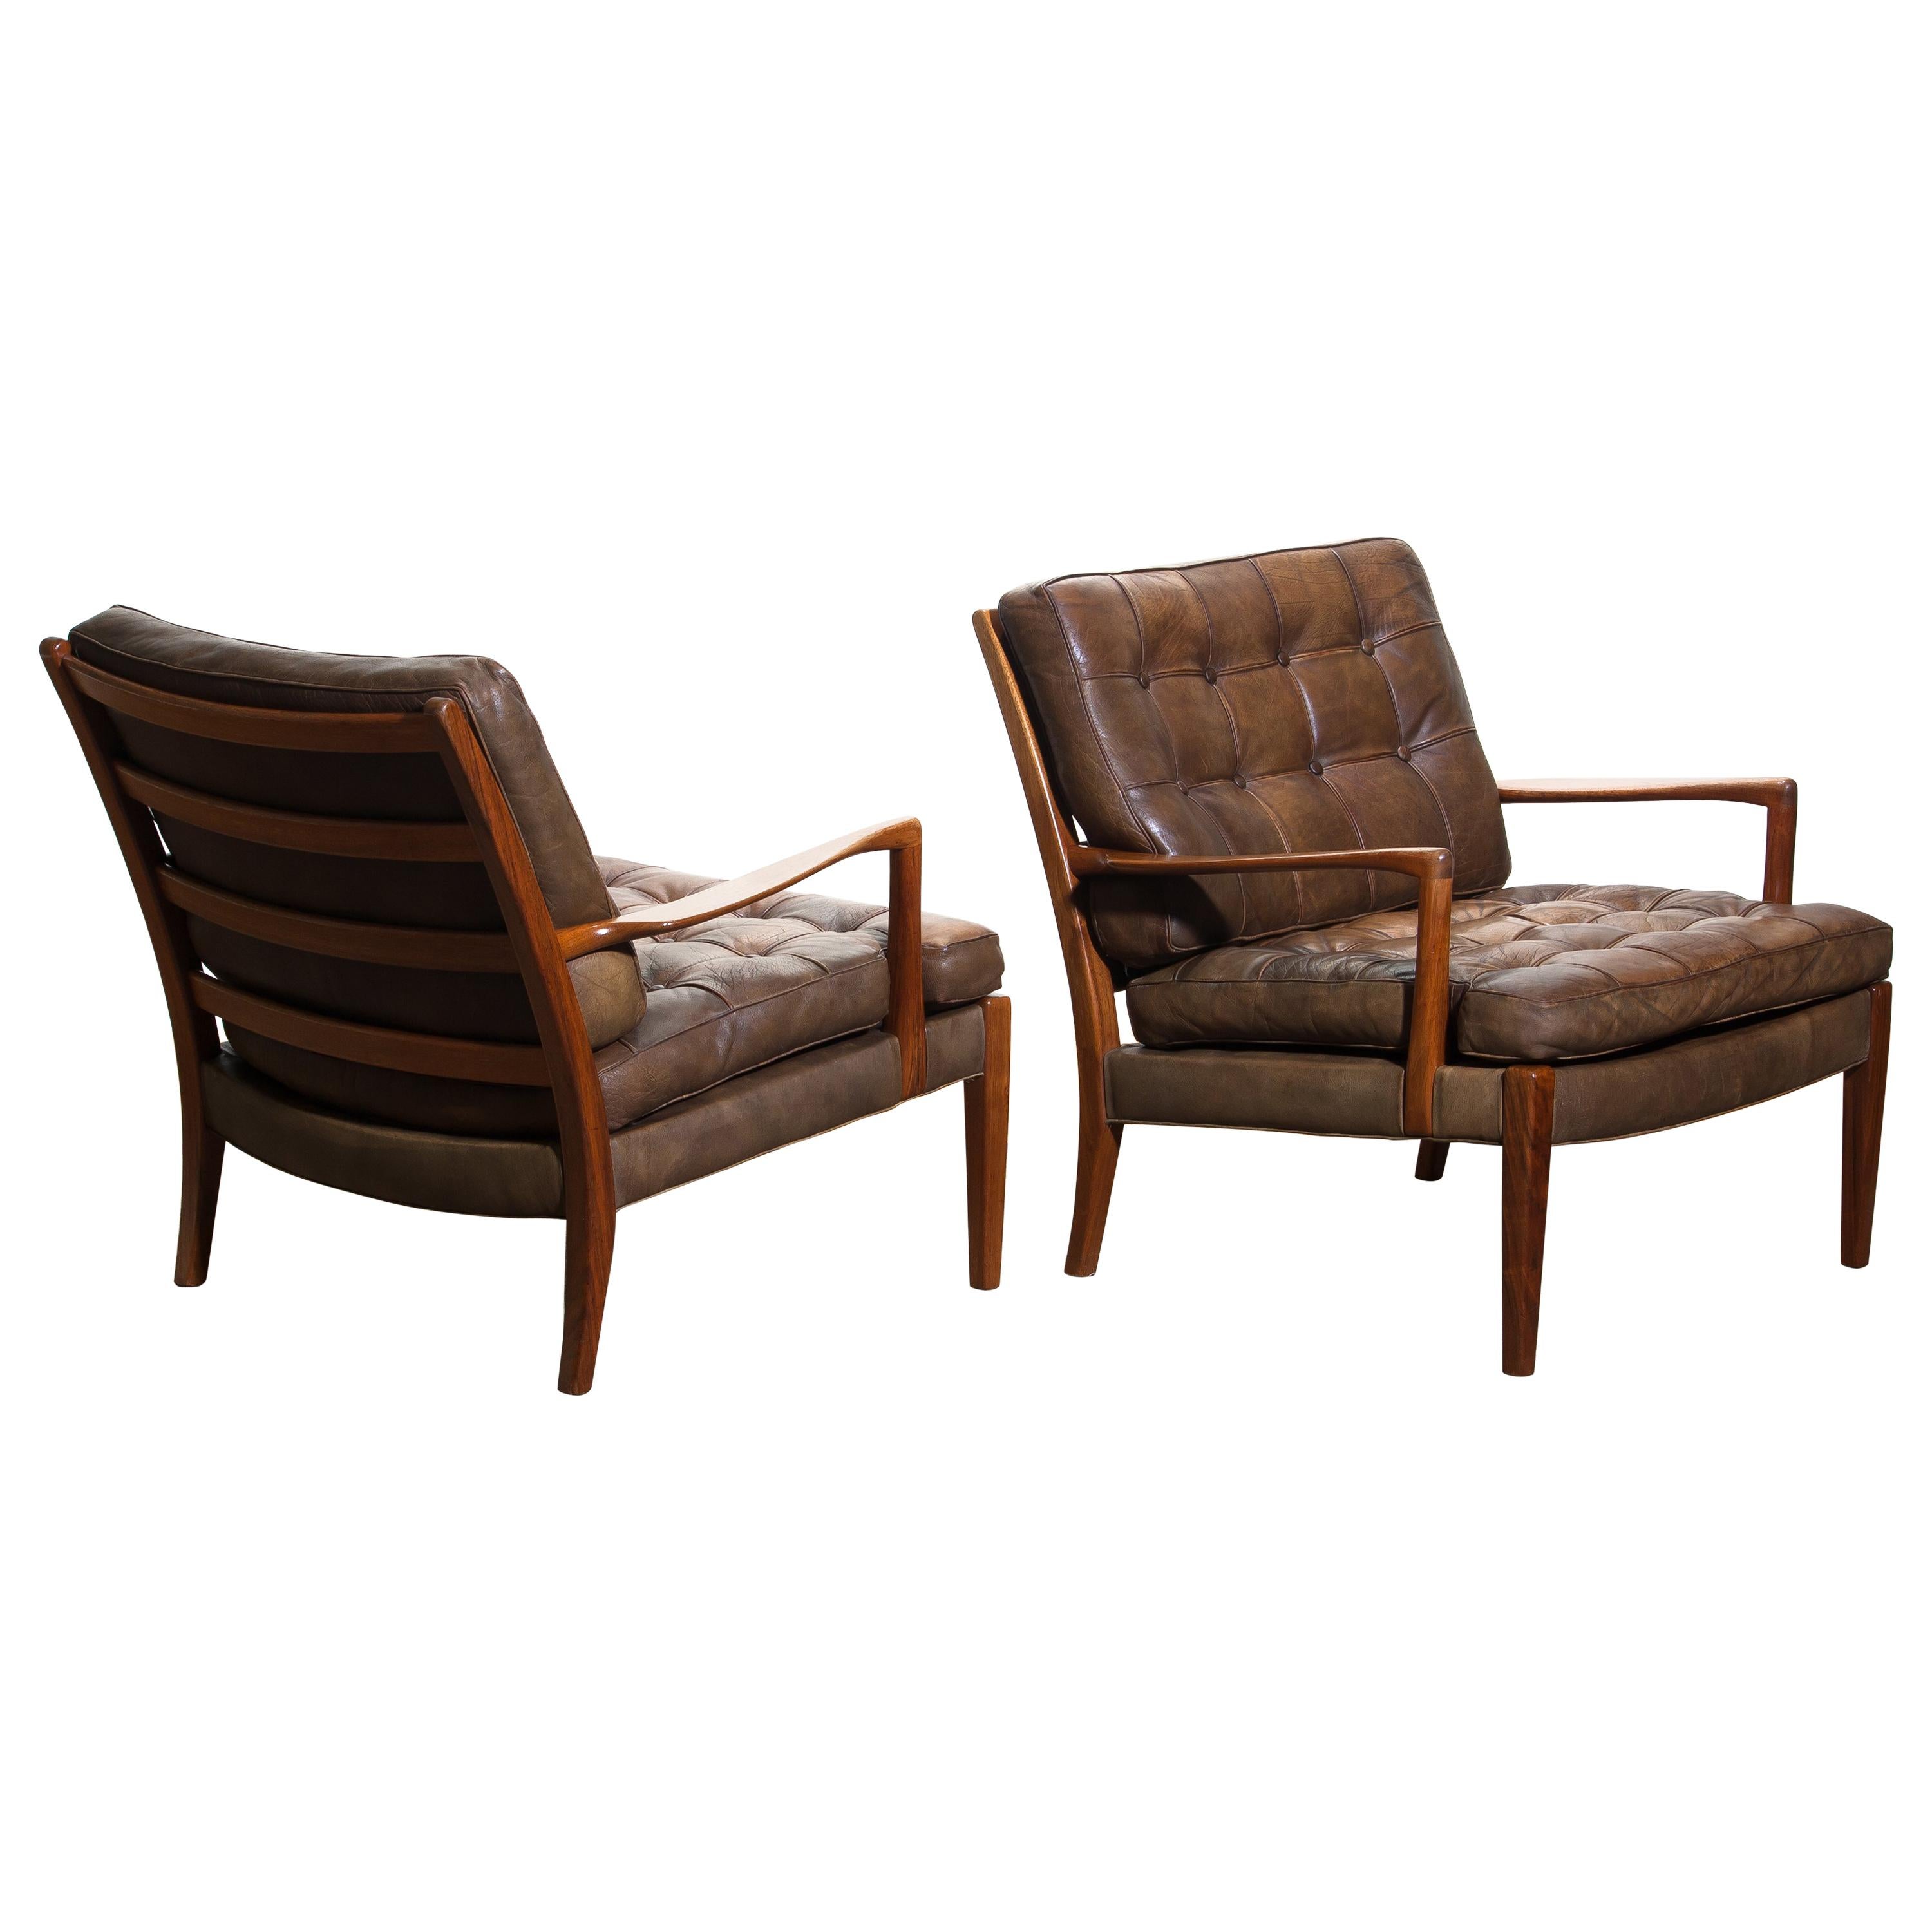 Pair of Leather Easy or Lounge Chairs Model "Loven" by Arne Norell Ab, Sweden